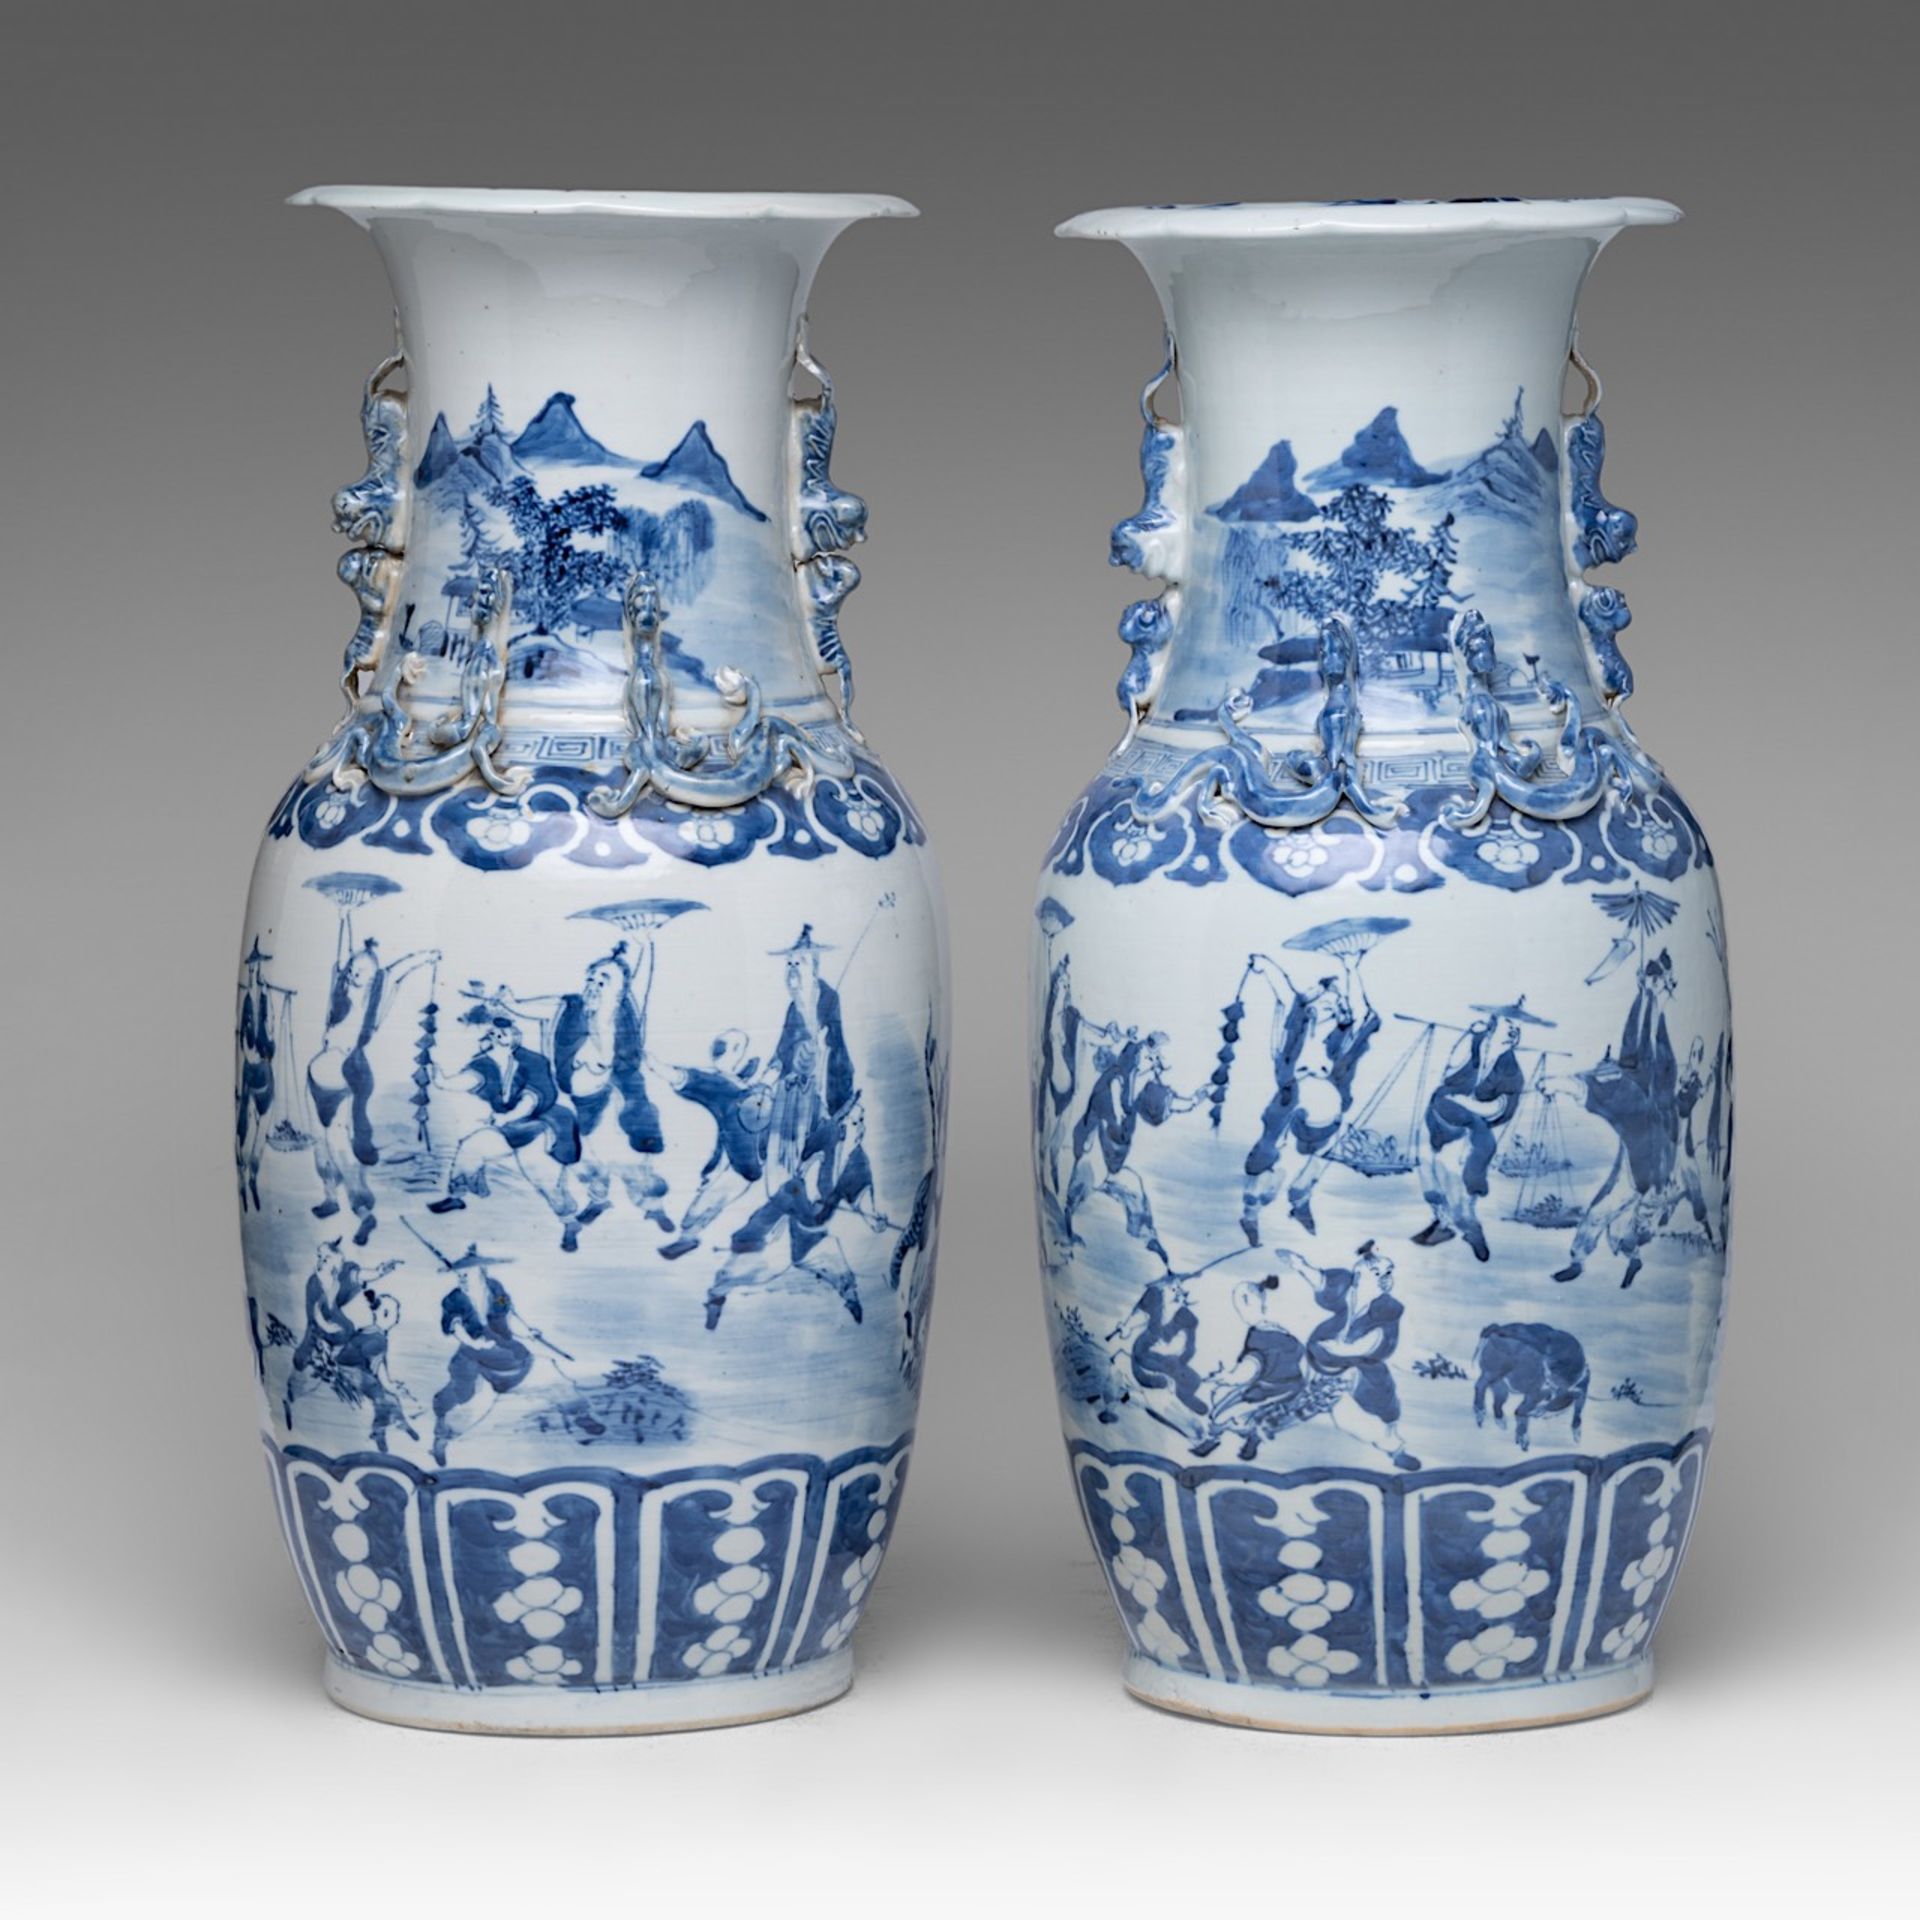 A pair of Chinese blue and white 'Figures in a Daily Life Scene' vases, 19thC, H 45 cm